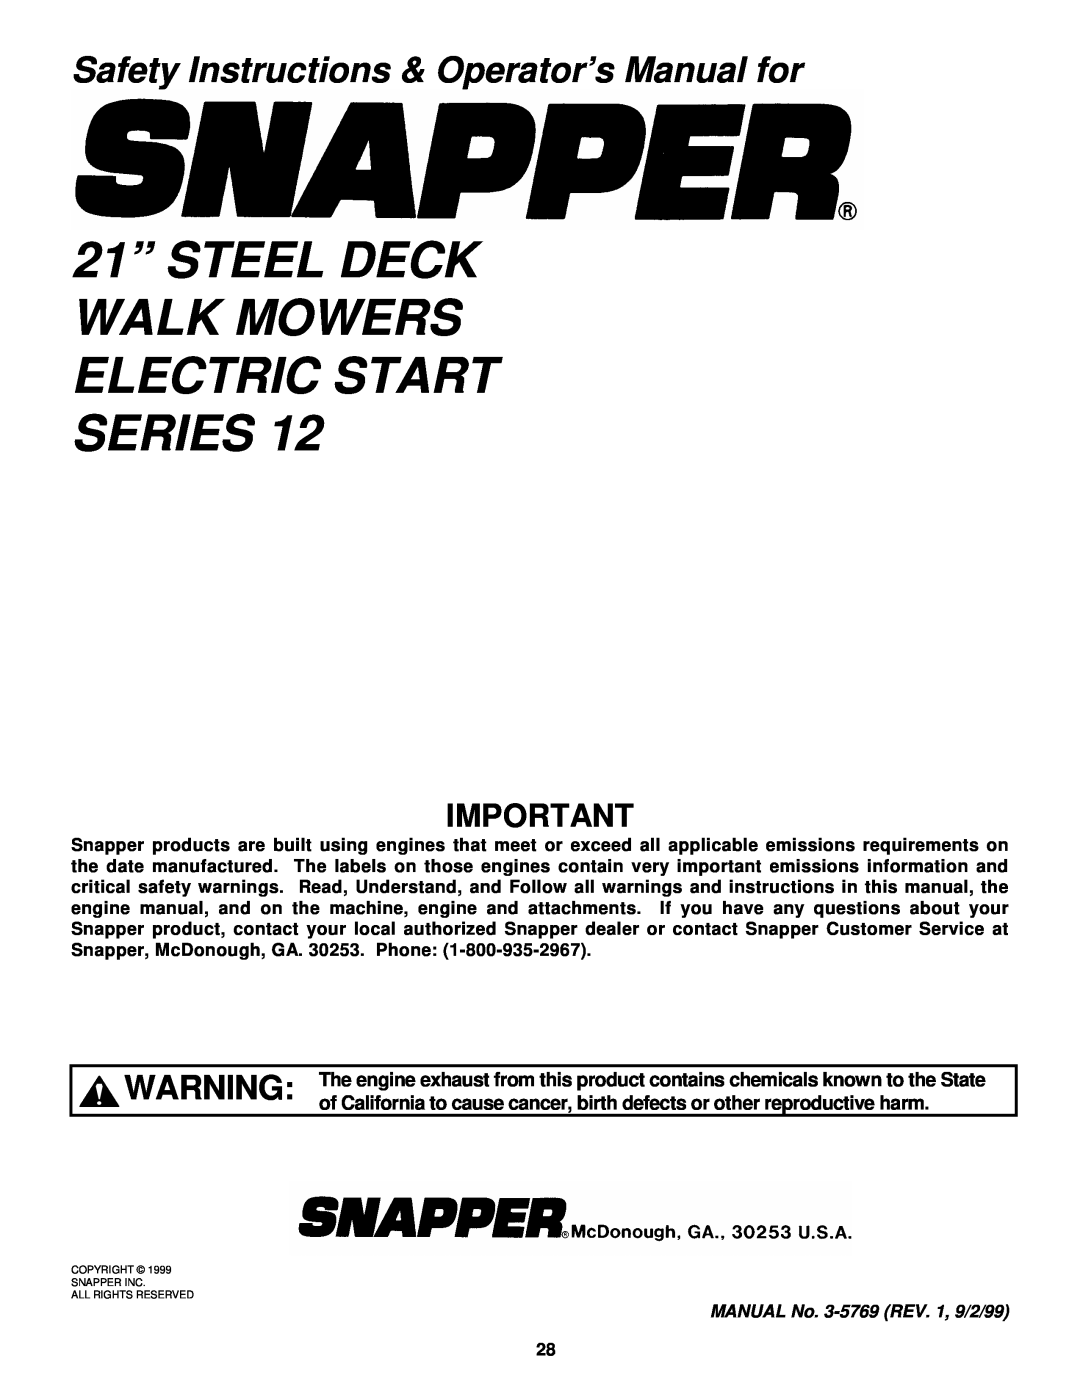 Snapper P216012E 21” STEEL DECK WALK MOWERS ELECTRIC START SERIES, Safety Instructions & Operator’s Manual for 